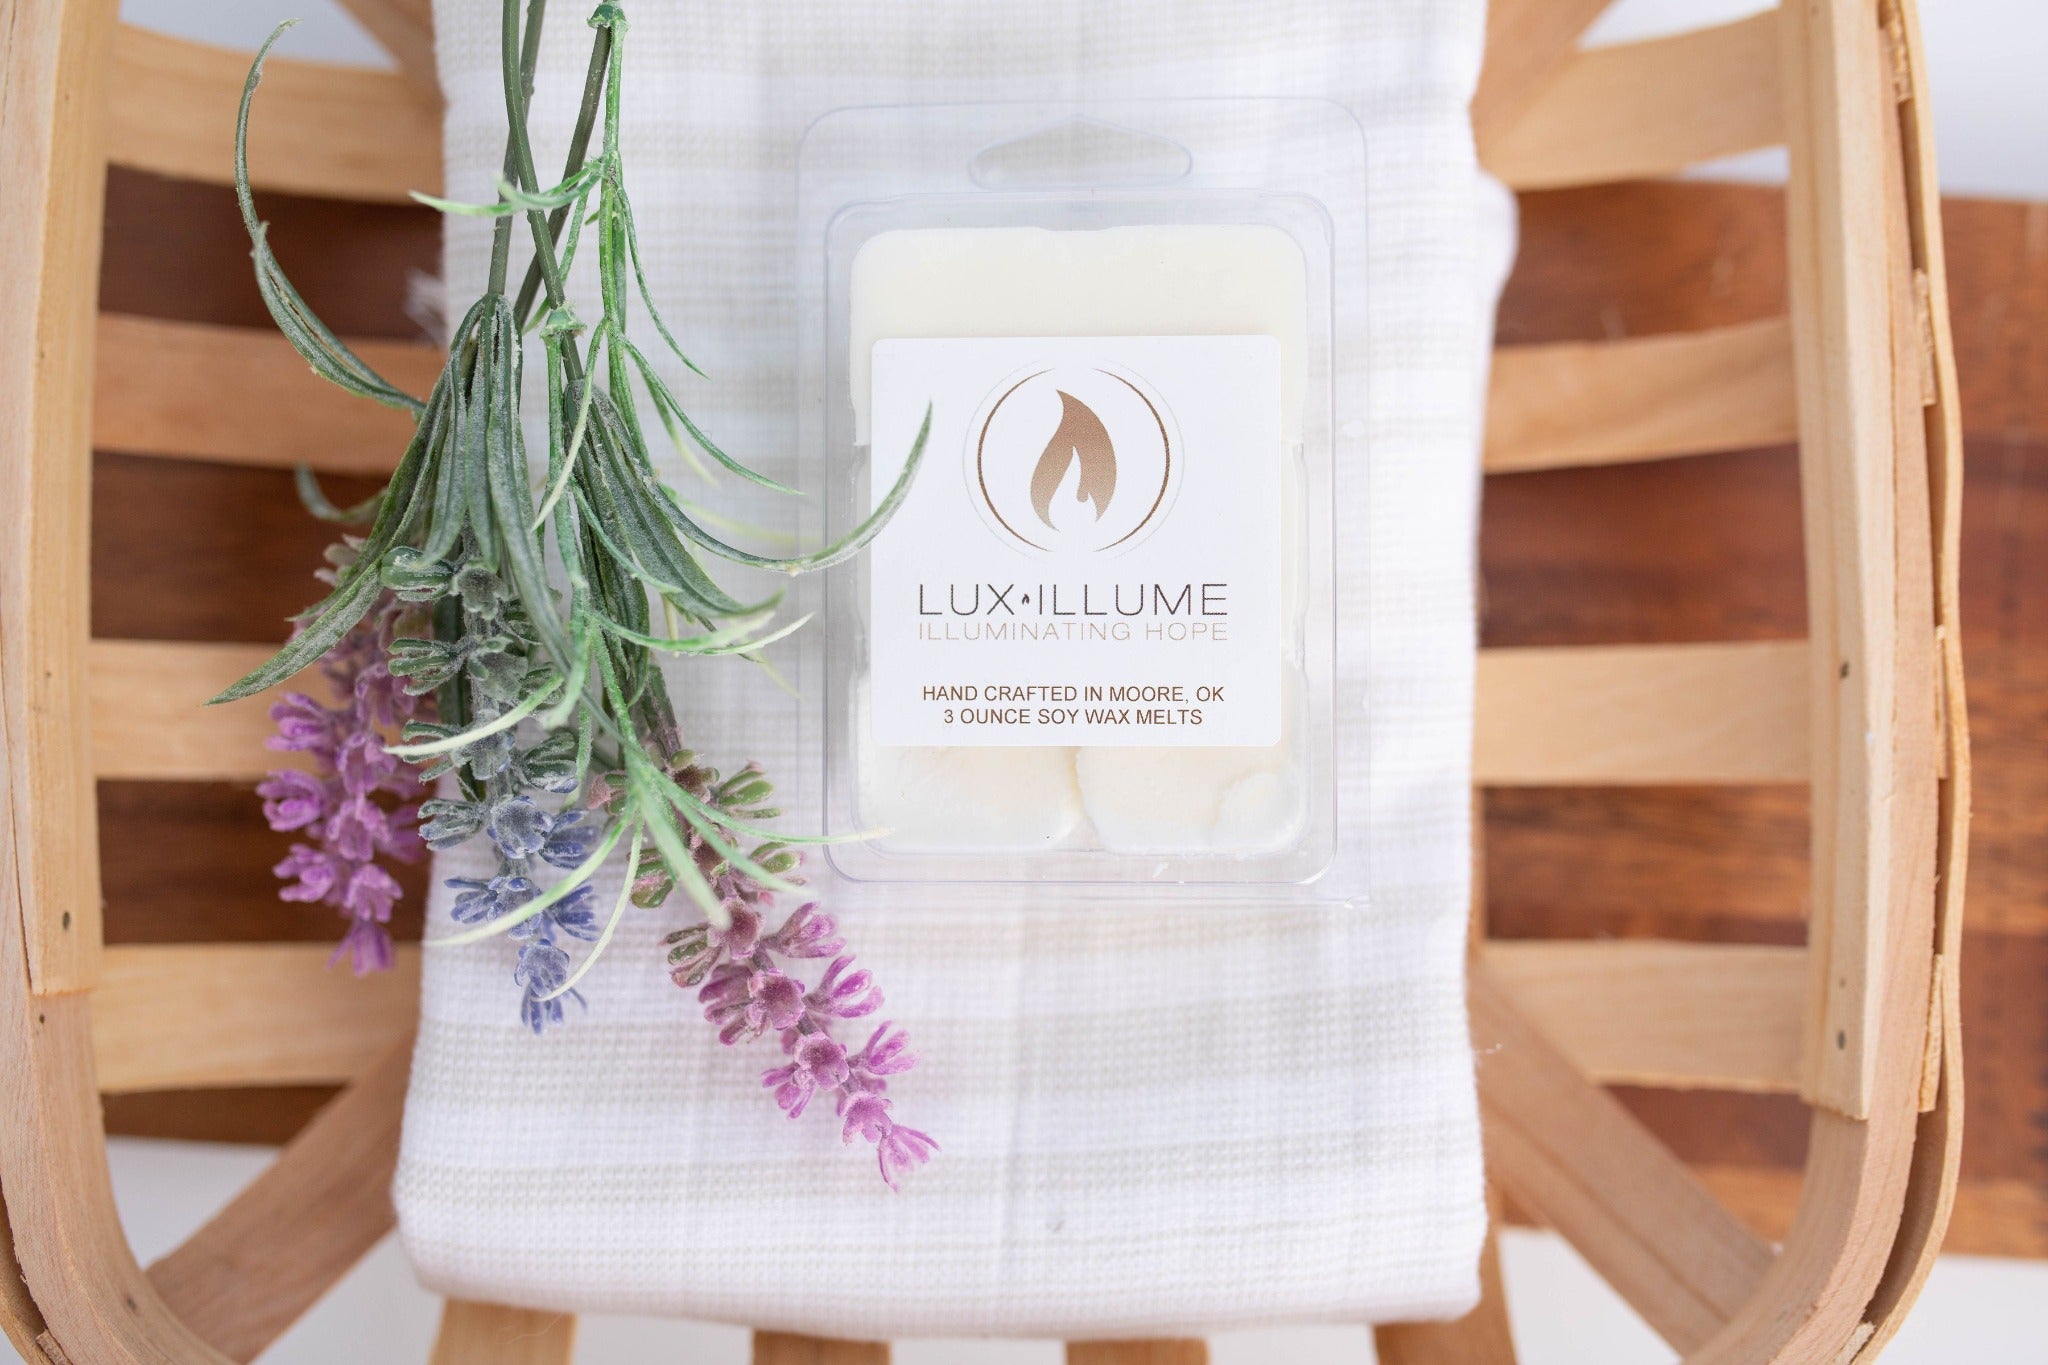 A plastic, six-cavity clamshell melt in a wood basket with a linen towel and small bunch of lavender next to it.